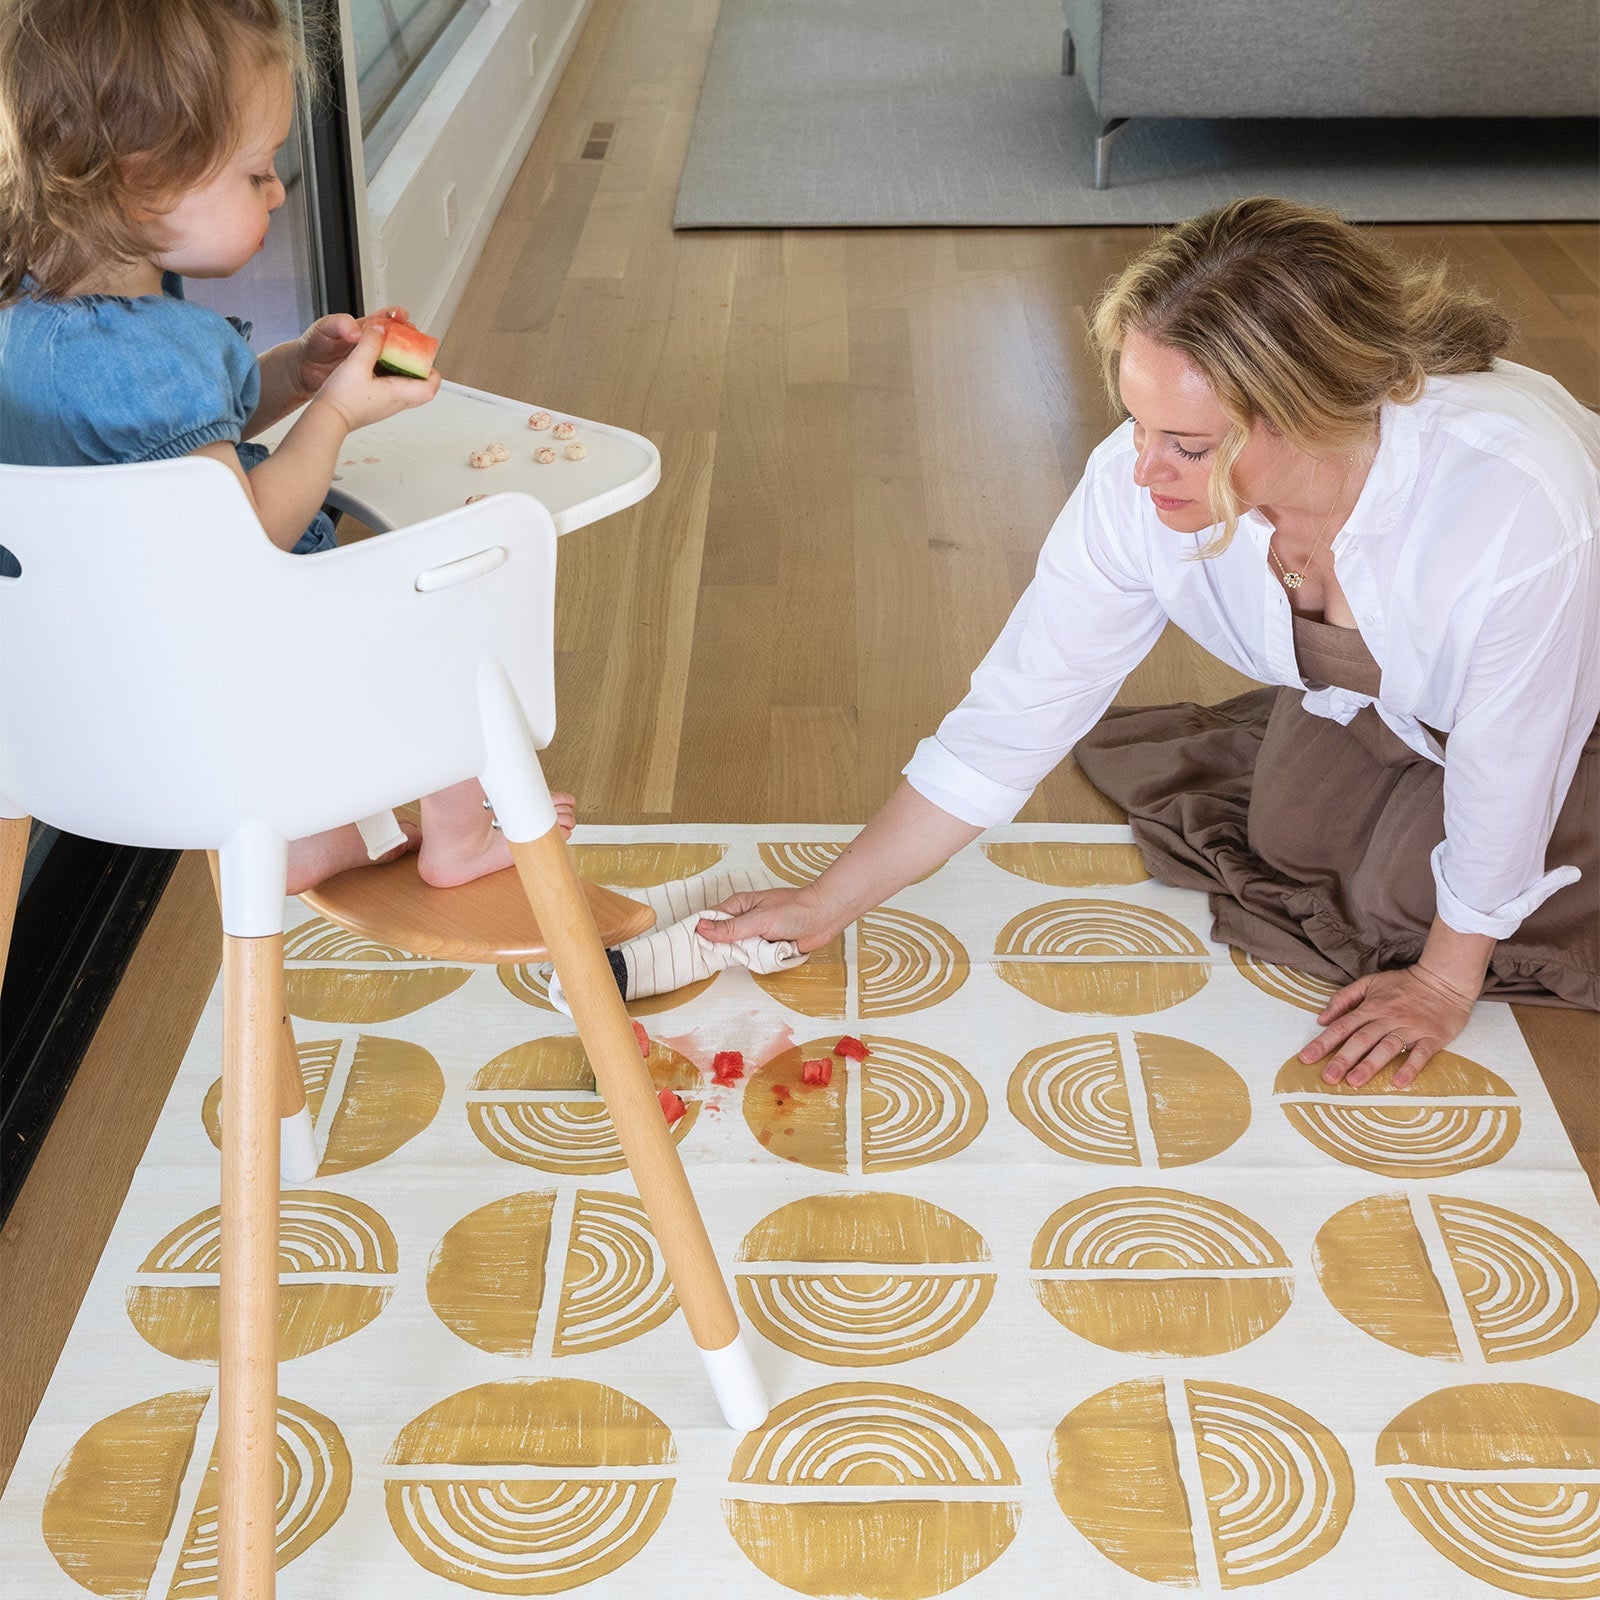 Ada modern minimalist baby high chair mat in Sunflower, mustard yellow and off white. Shown with a baby in a high chair and mom cleaning up a spill.